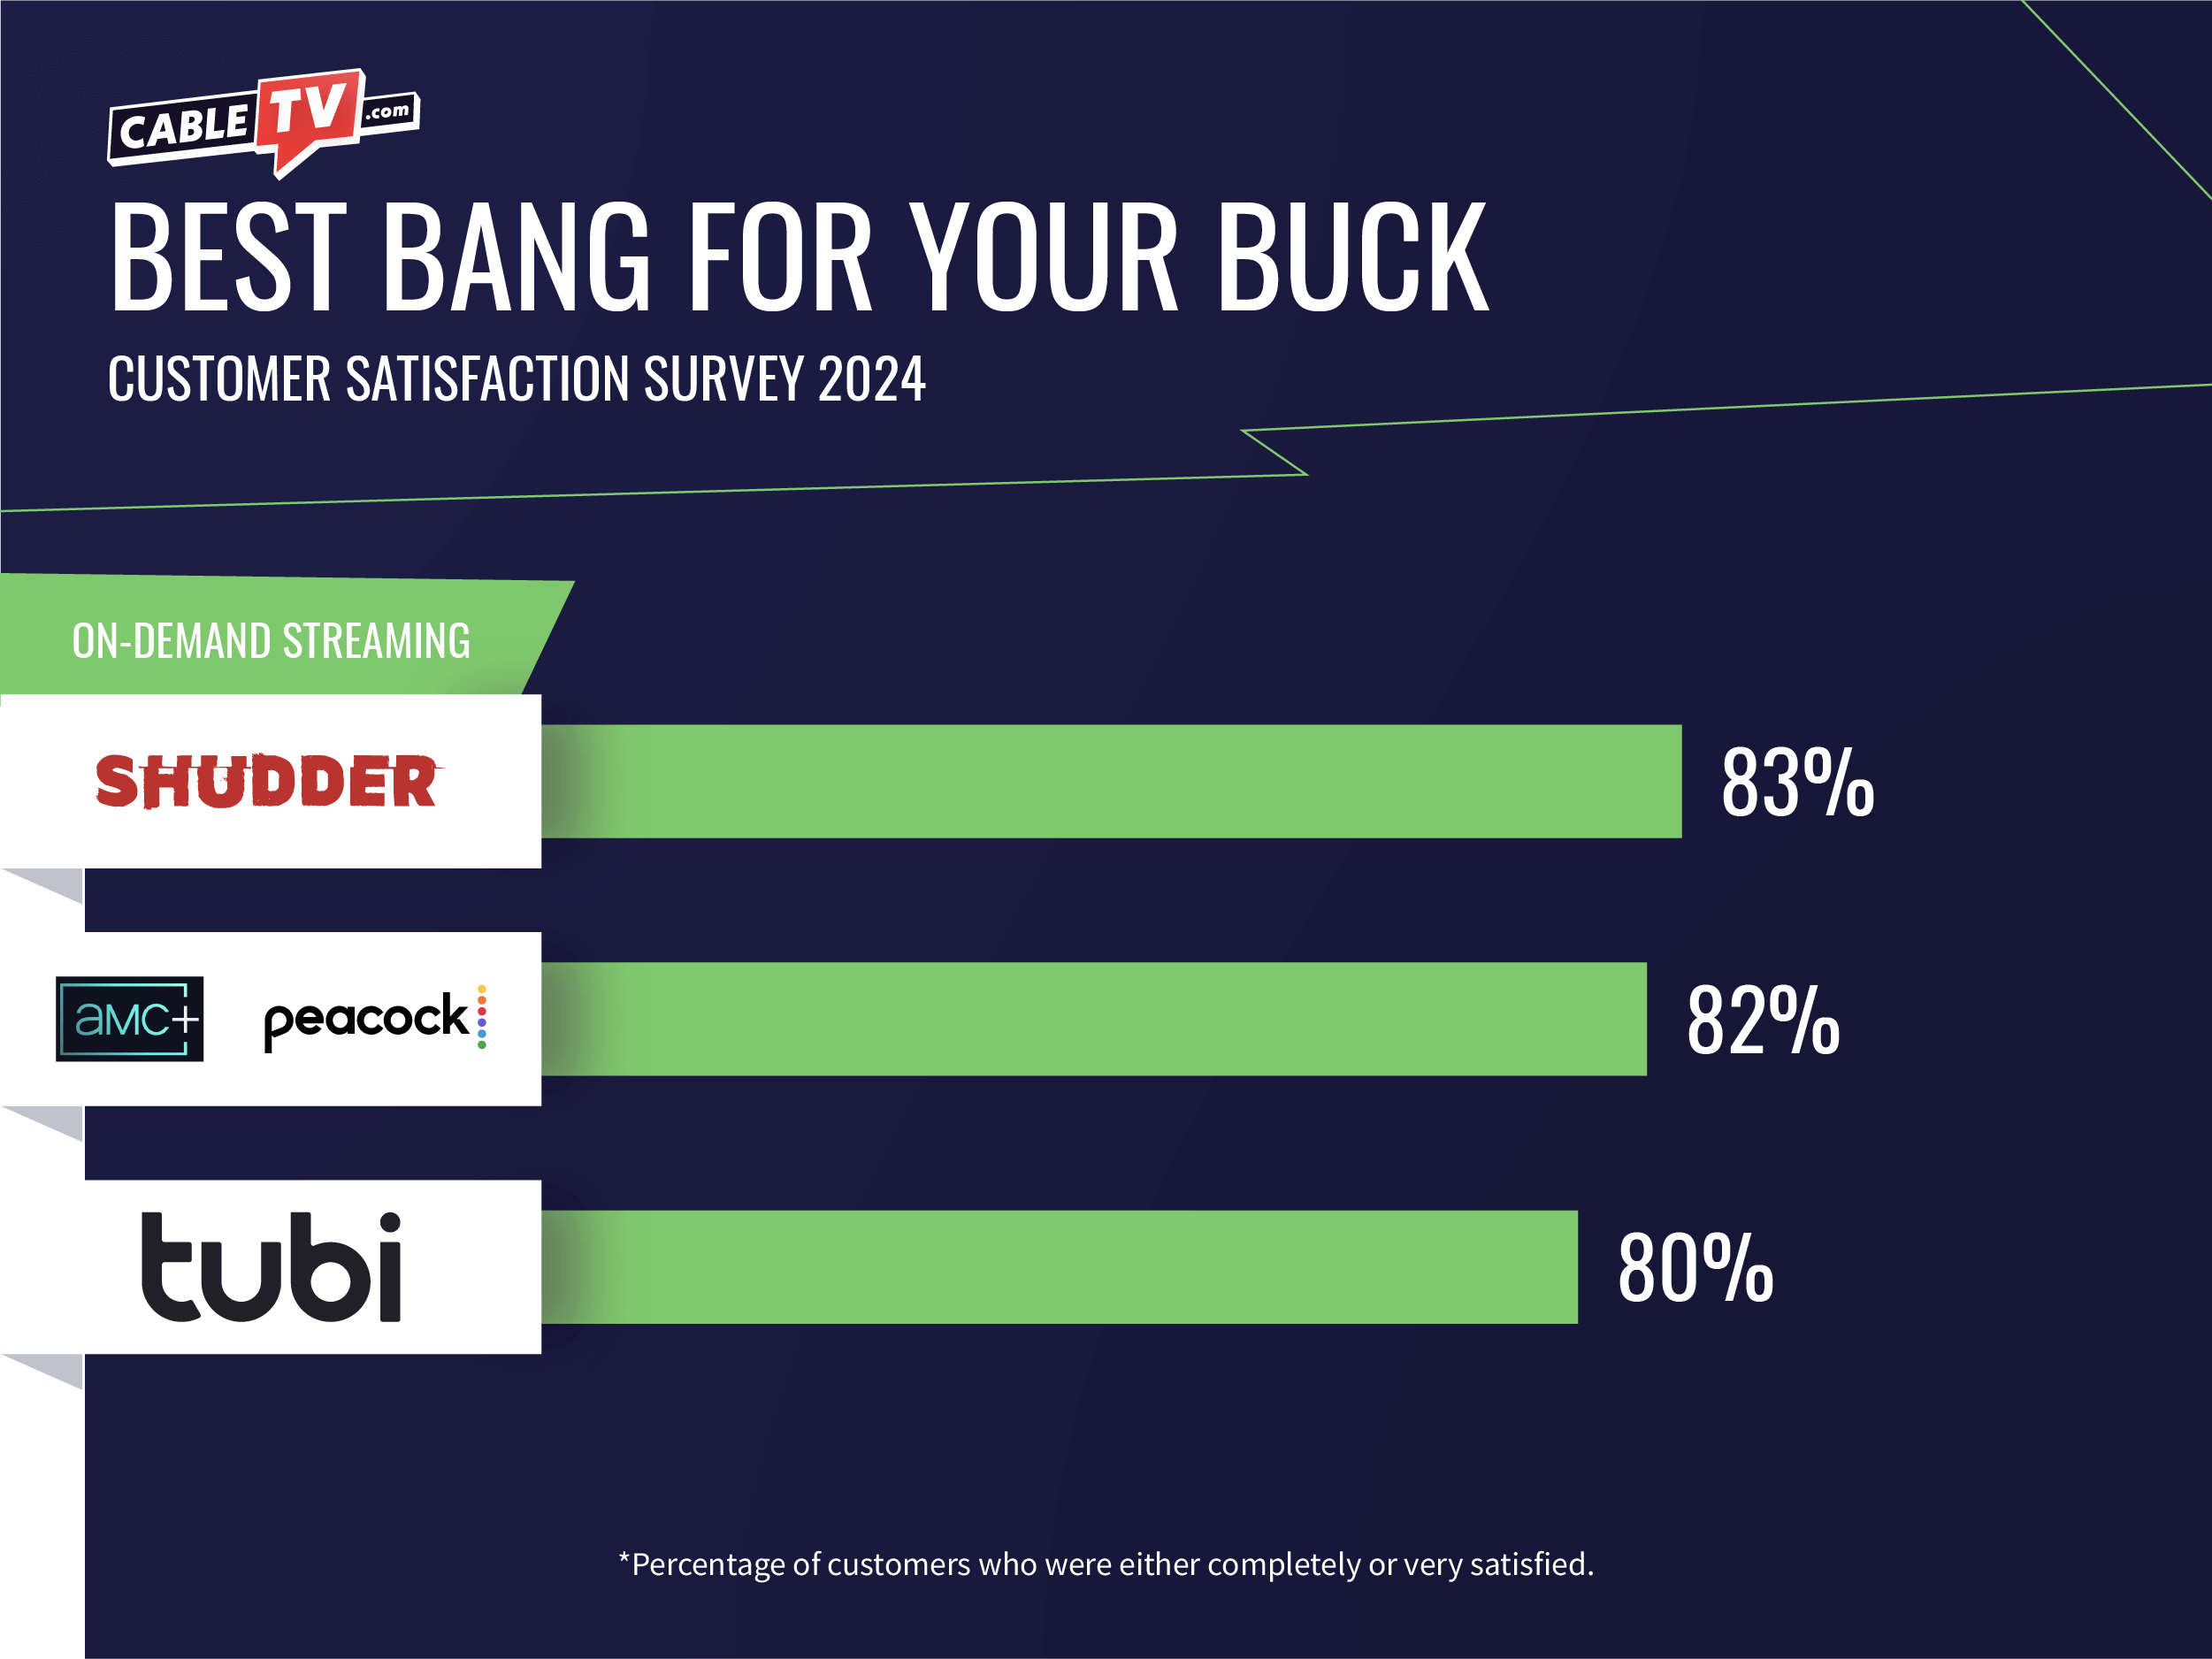 Shudder scores 83% for best value, just edging out AMC+ and Peacock